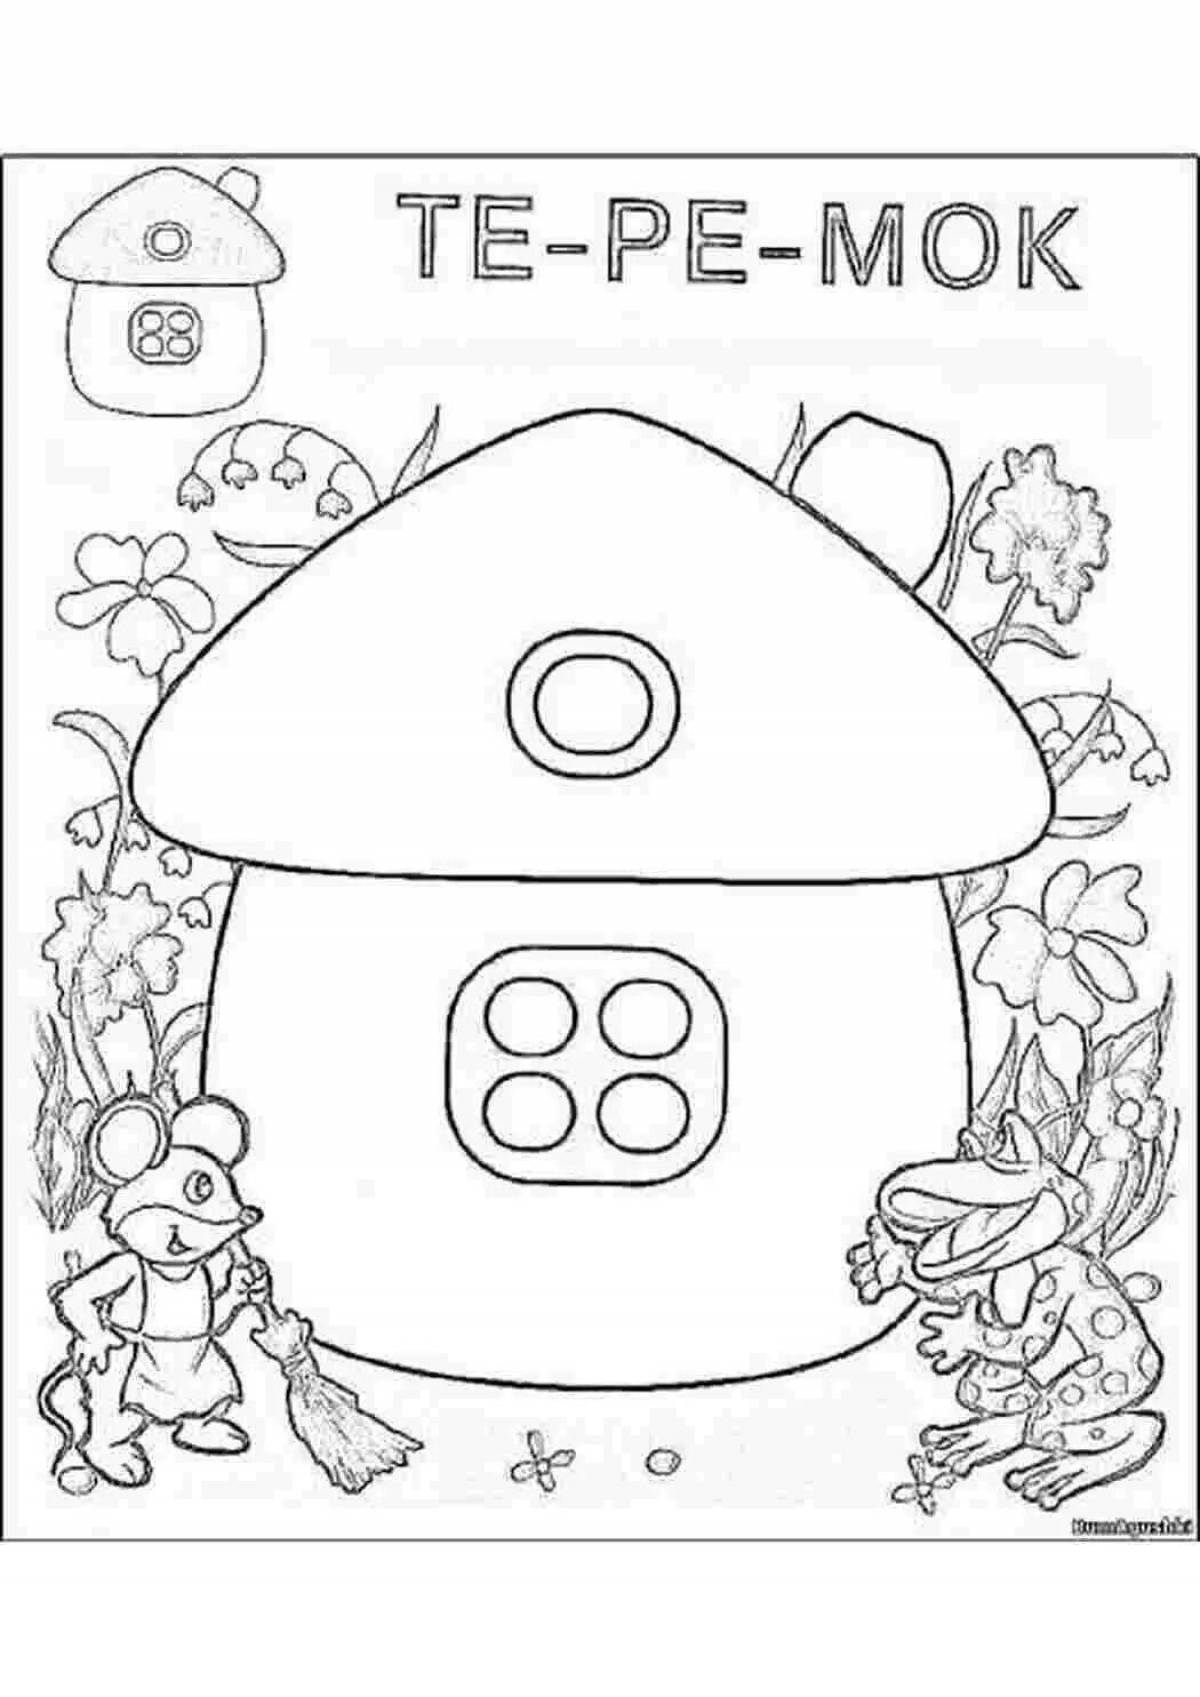 Color-frenzy teremok coloring book for kids